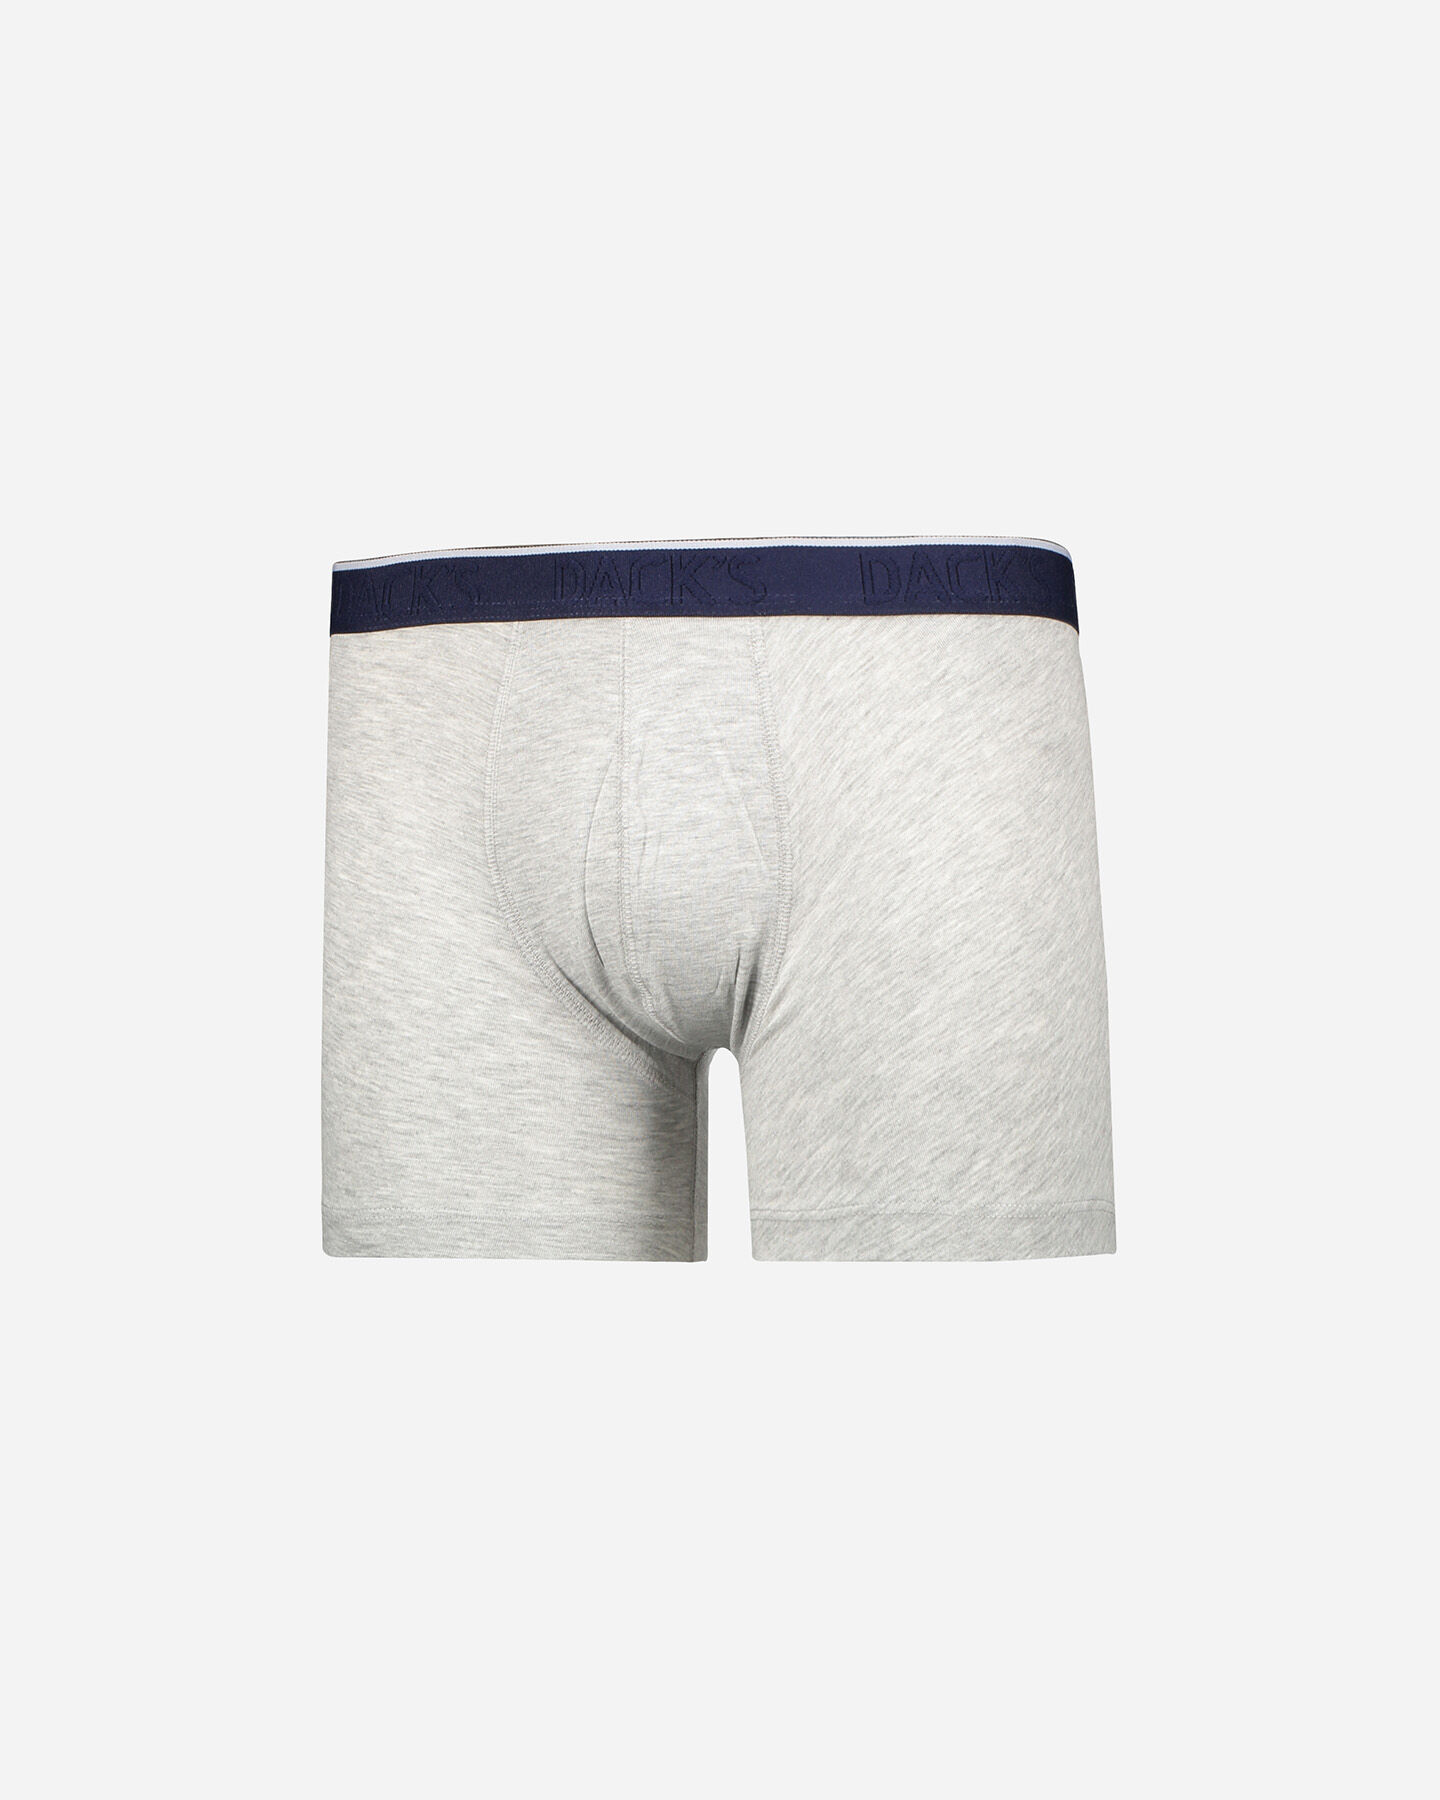  Intimo DACK'S BIPACK BASIC BOXER M S4061965|519/GM01|L scatto 1